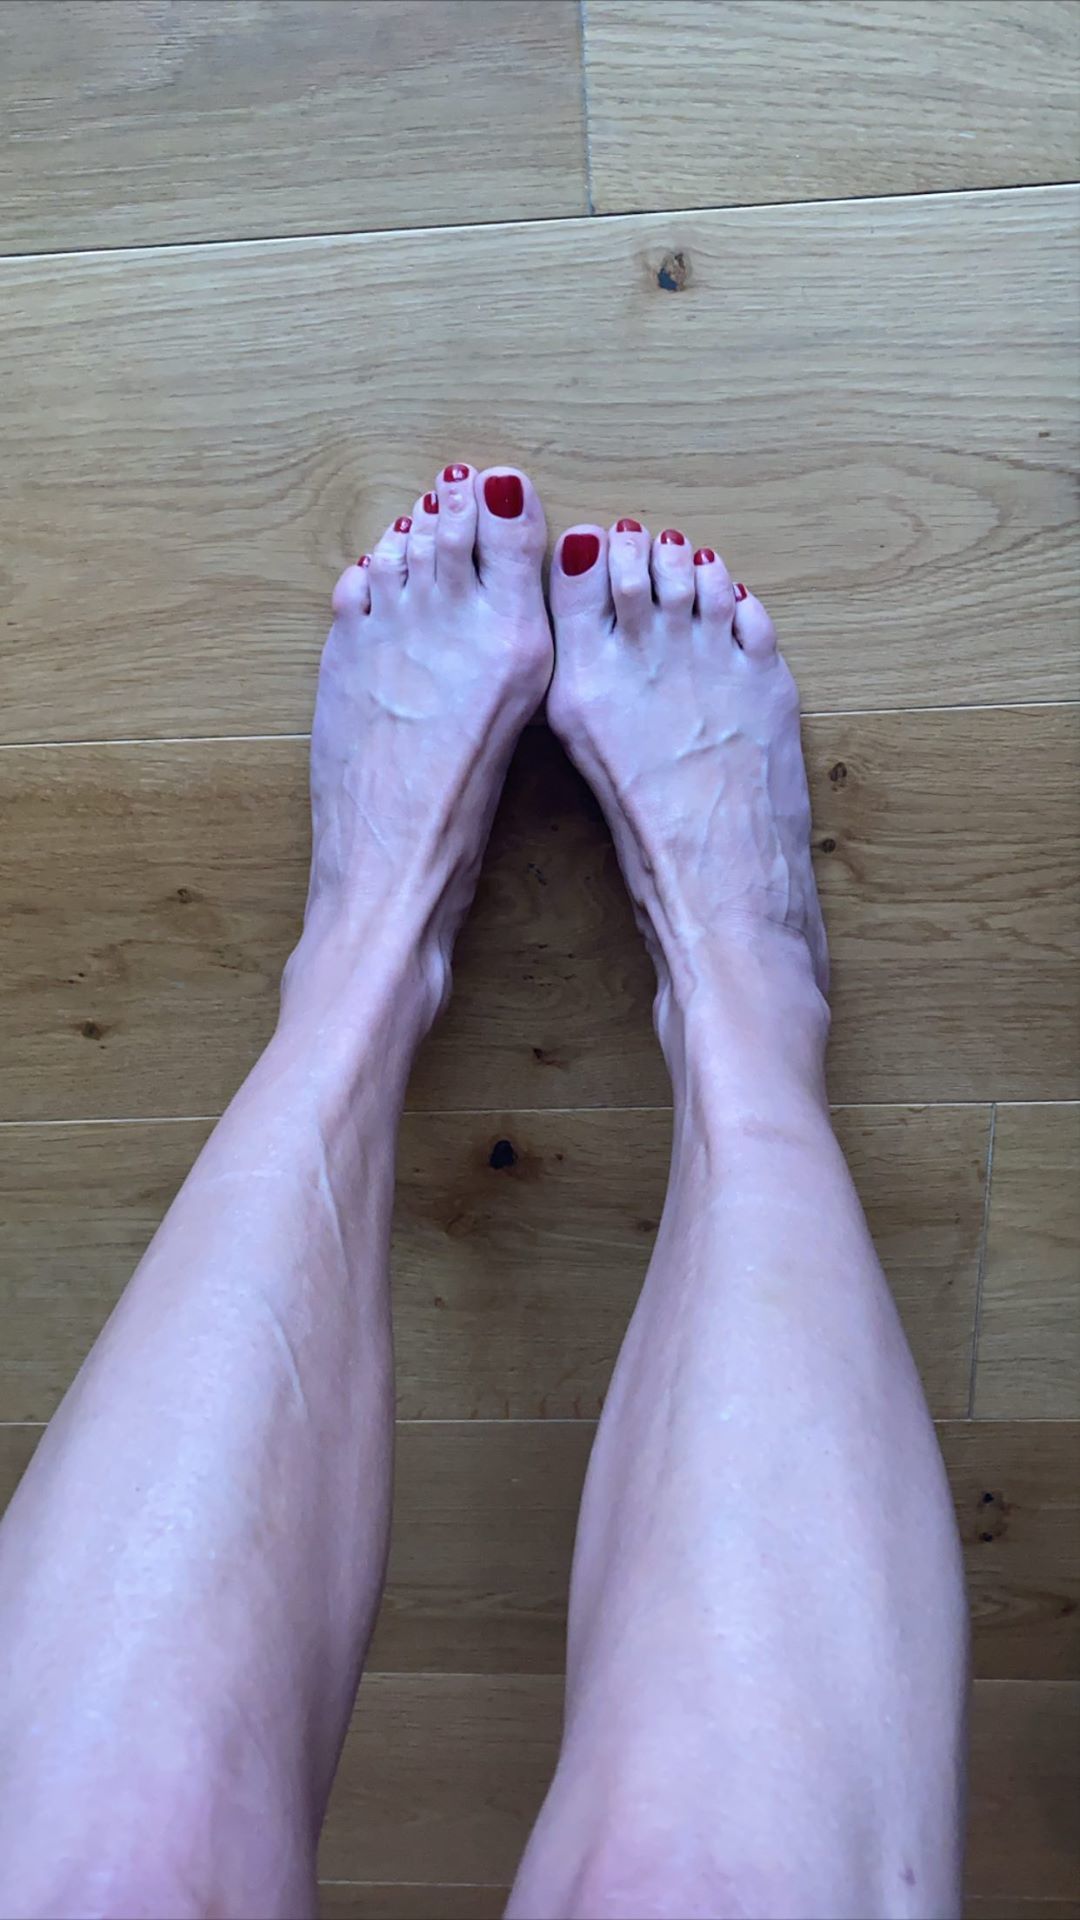 People who liked Kate Walsh's feet, also liked.